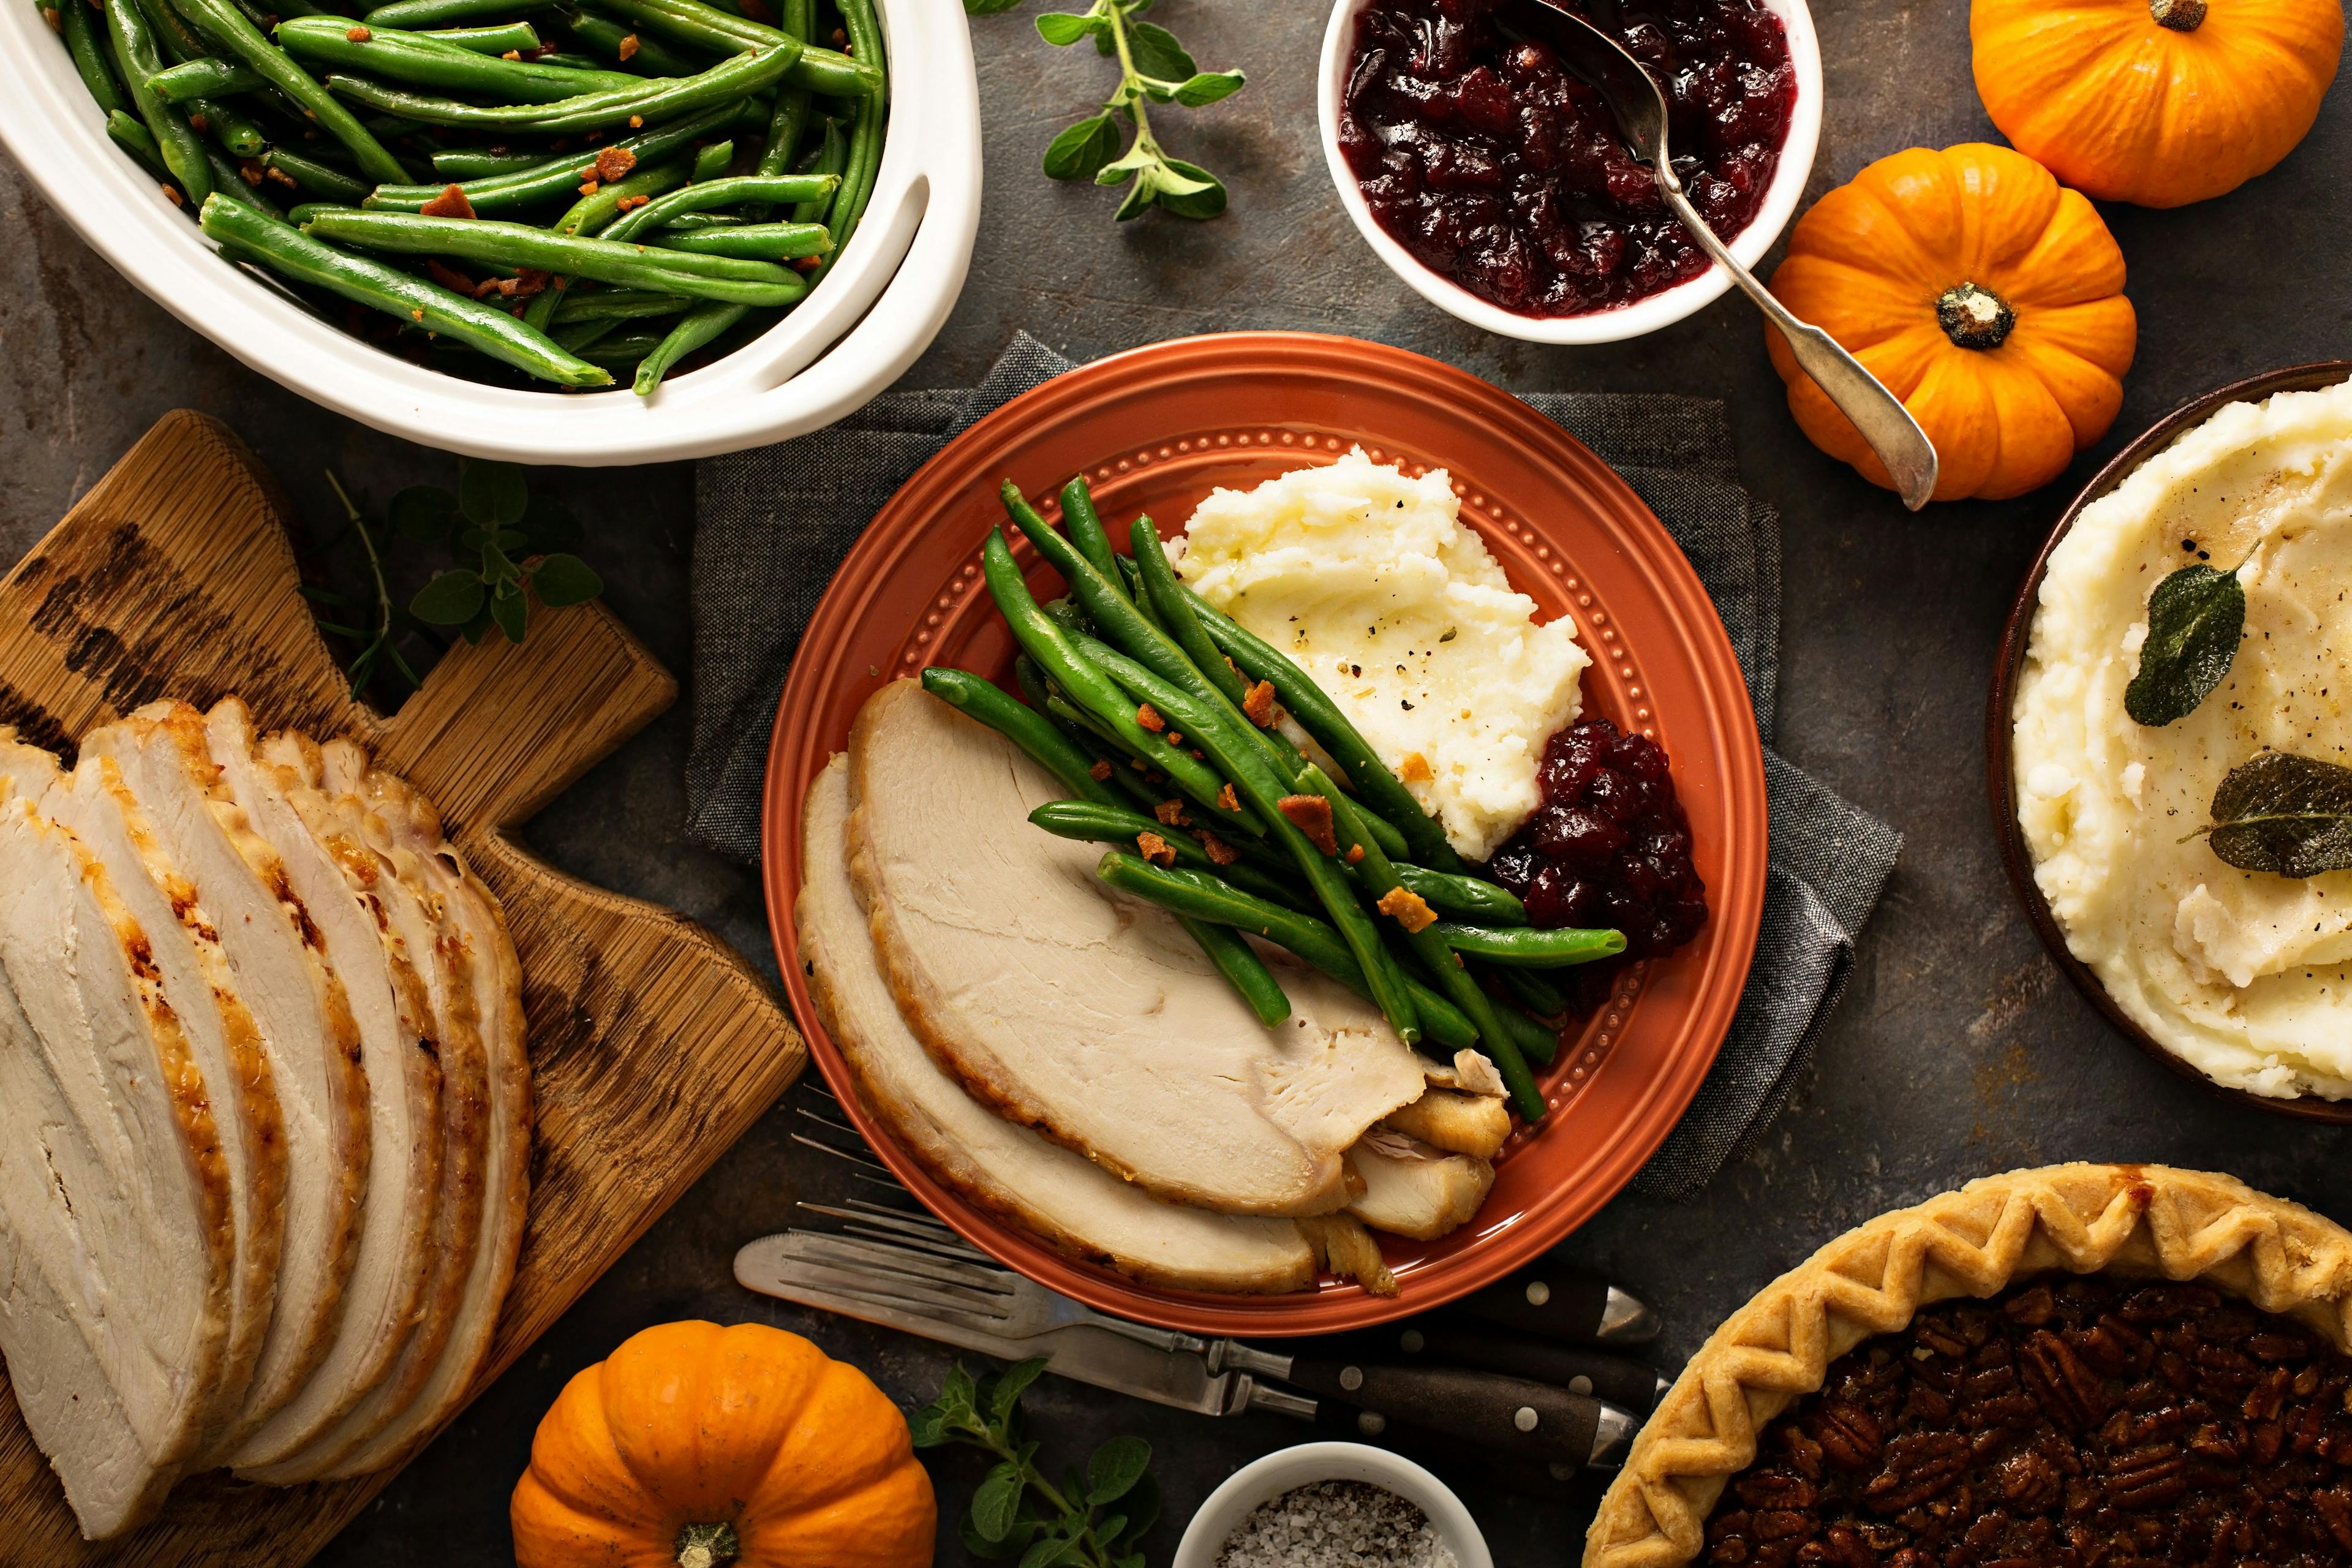 What is your favorite Thanksgiving food?